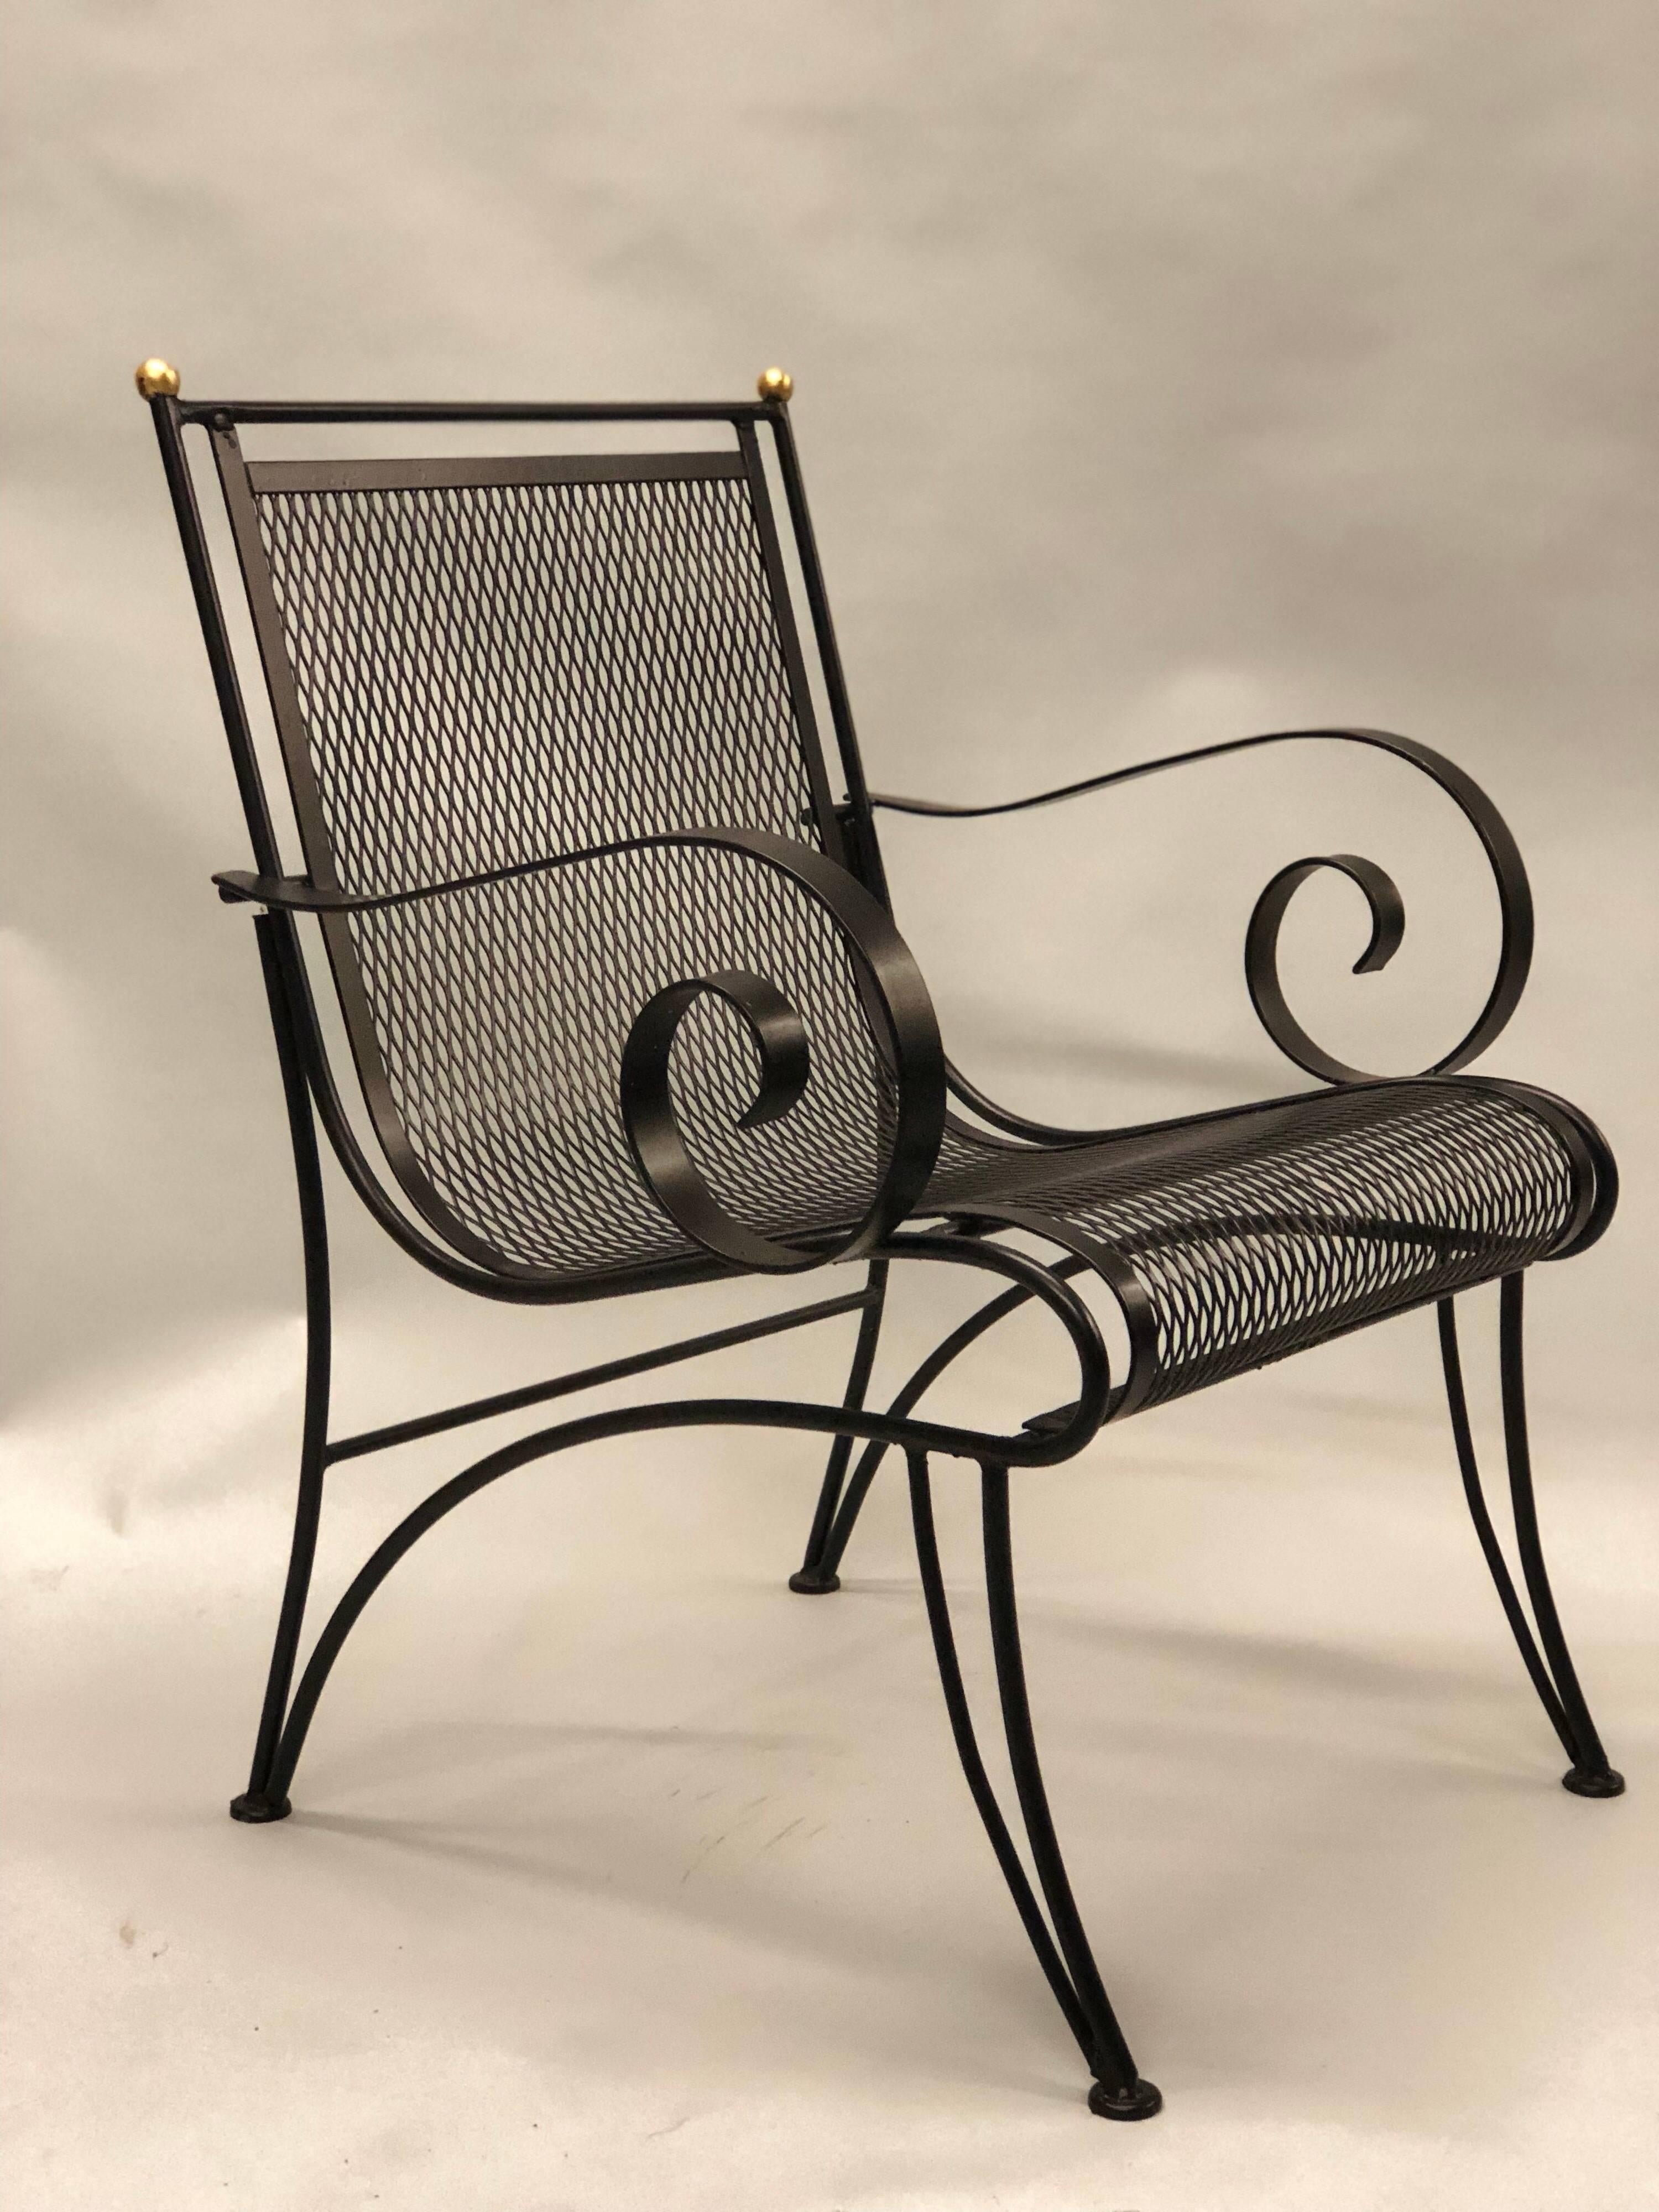 Elegant pair of French Mid-Century Modern neoclassical wrought iron armchairs attributed to René Prou.

The chairs are enameled black and feature a minimal transparent structure, front and rear saber legs and are finished with a pair of gilt ball